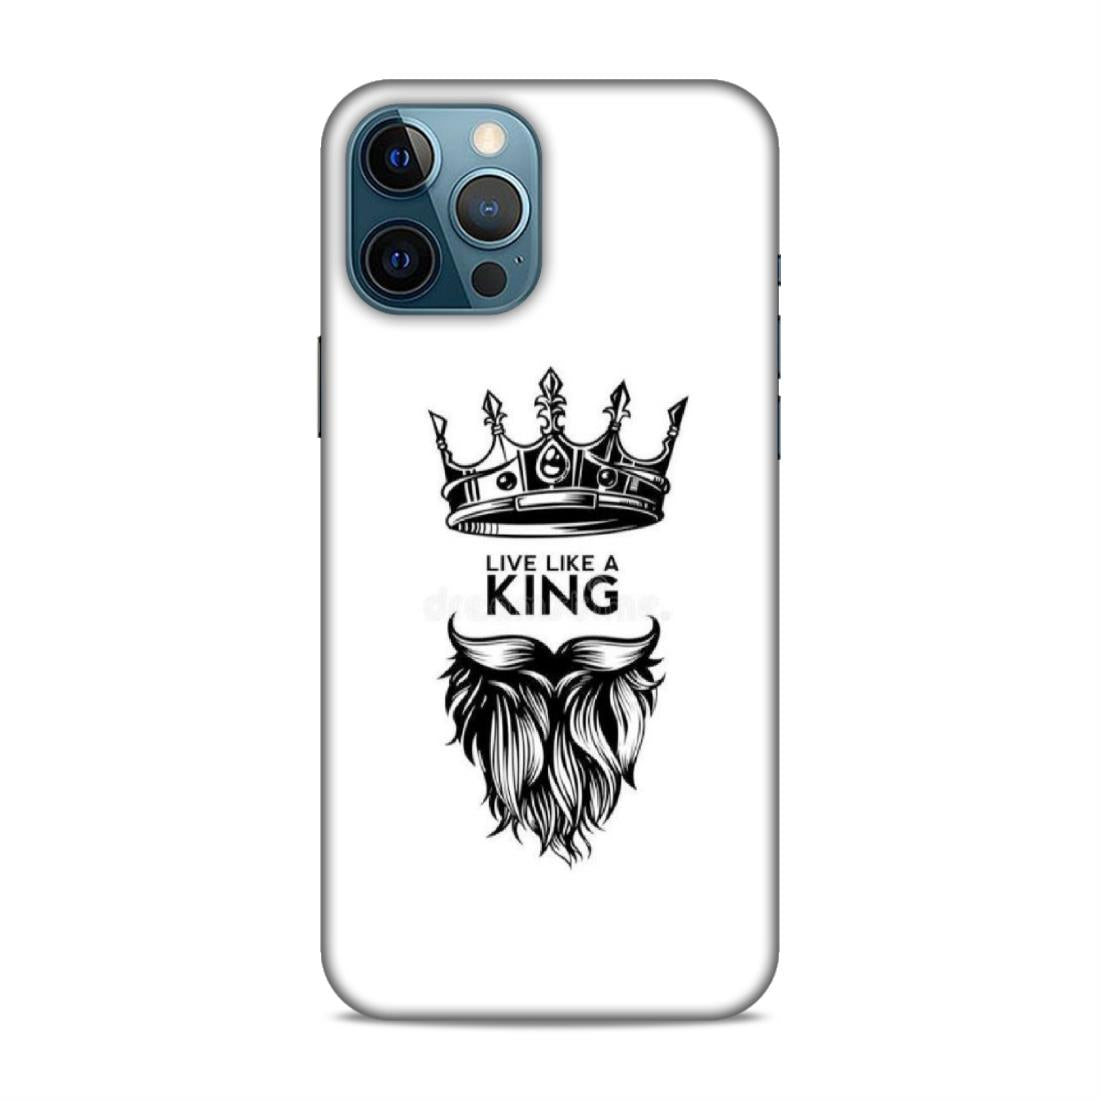 Live Like A King Hard Back Case For Apple iPhone 12 Pro Max